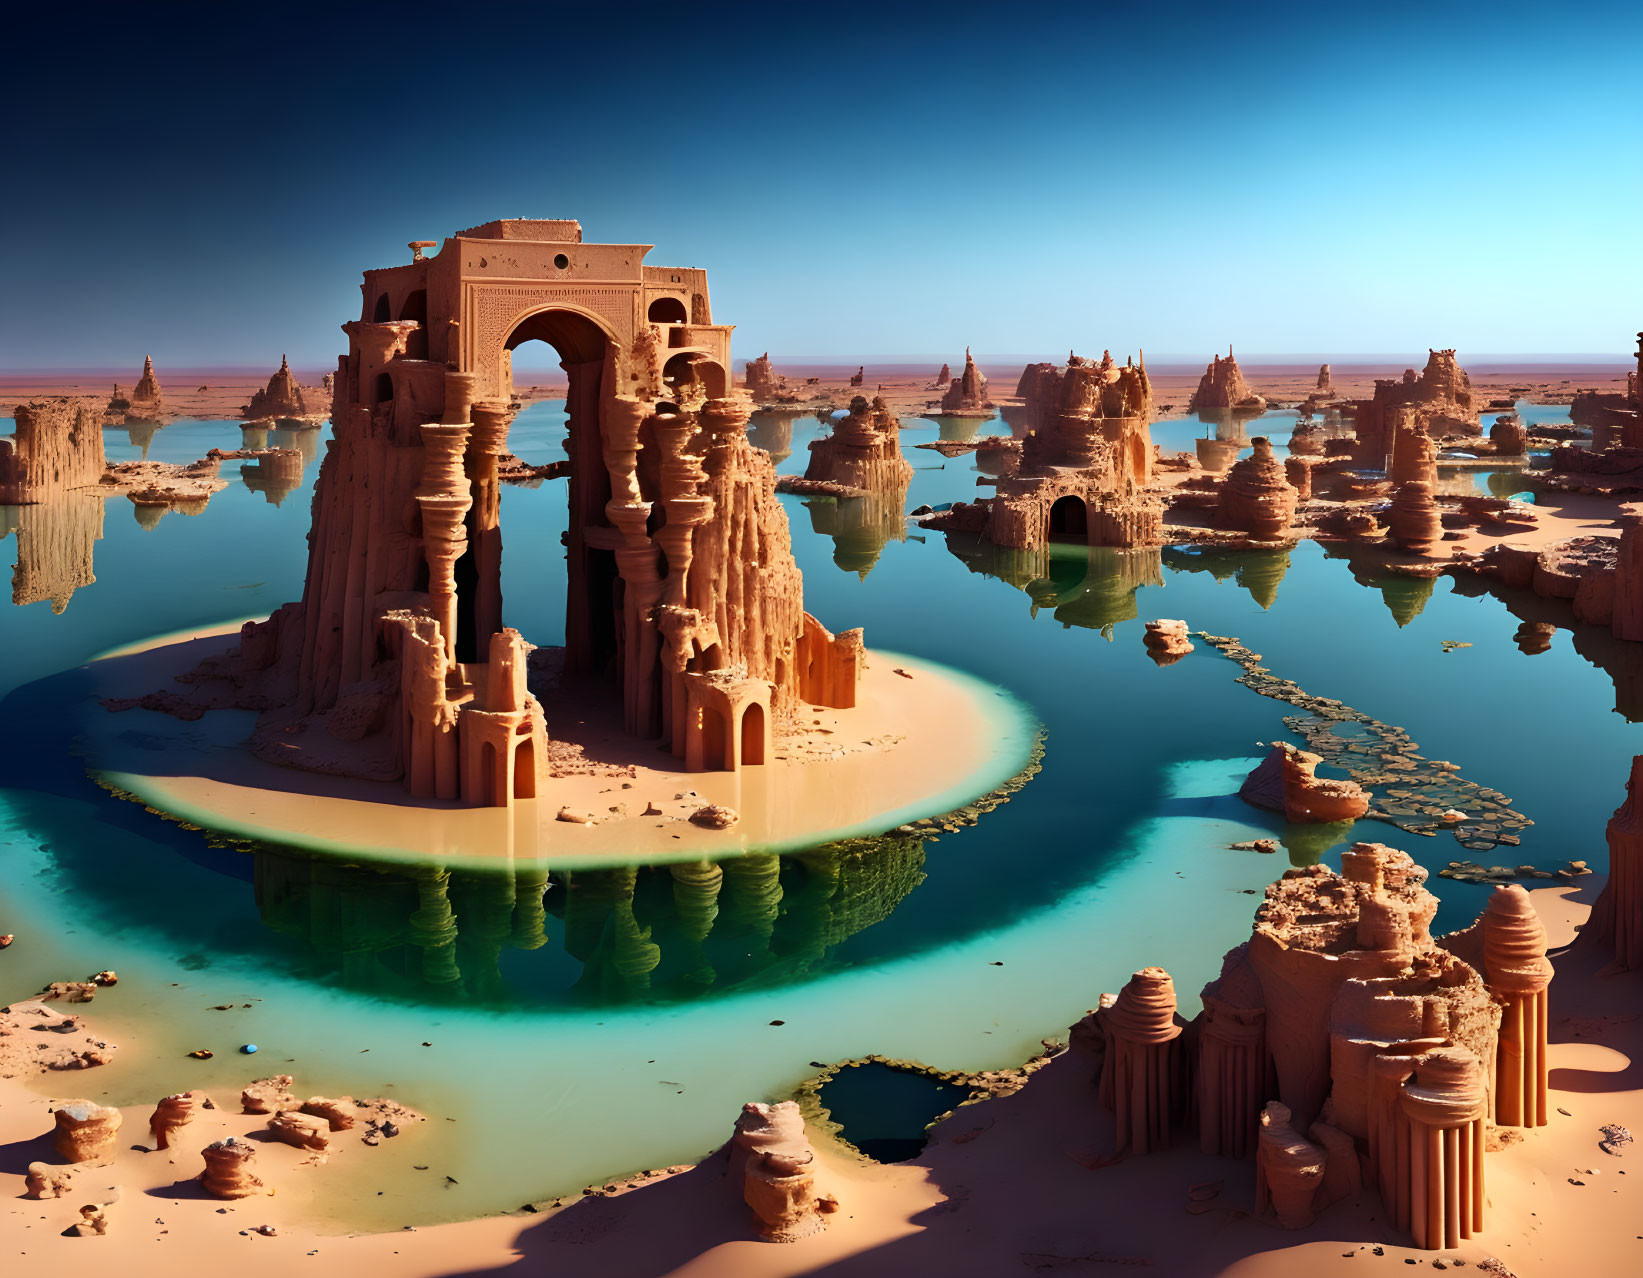 Surreal desert landscape with sandstone towers and oasis under clear blue sky